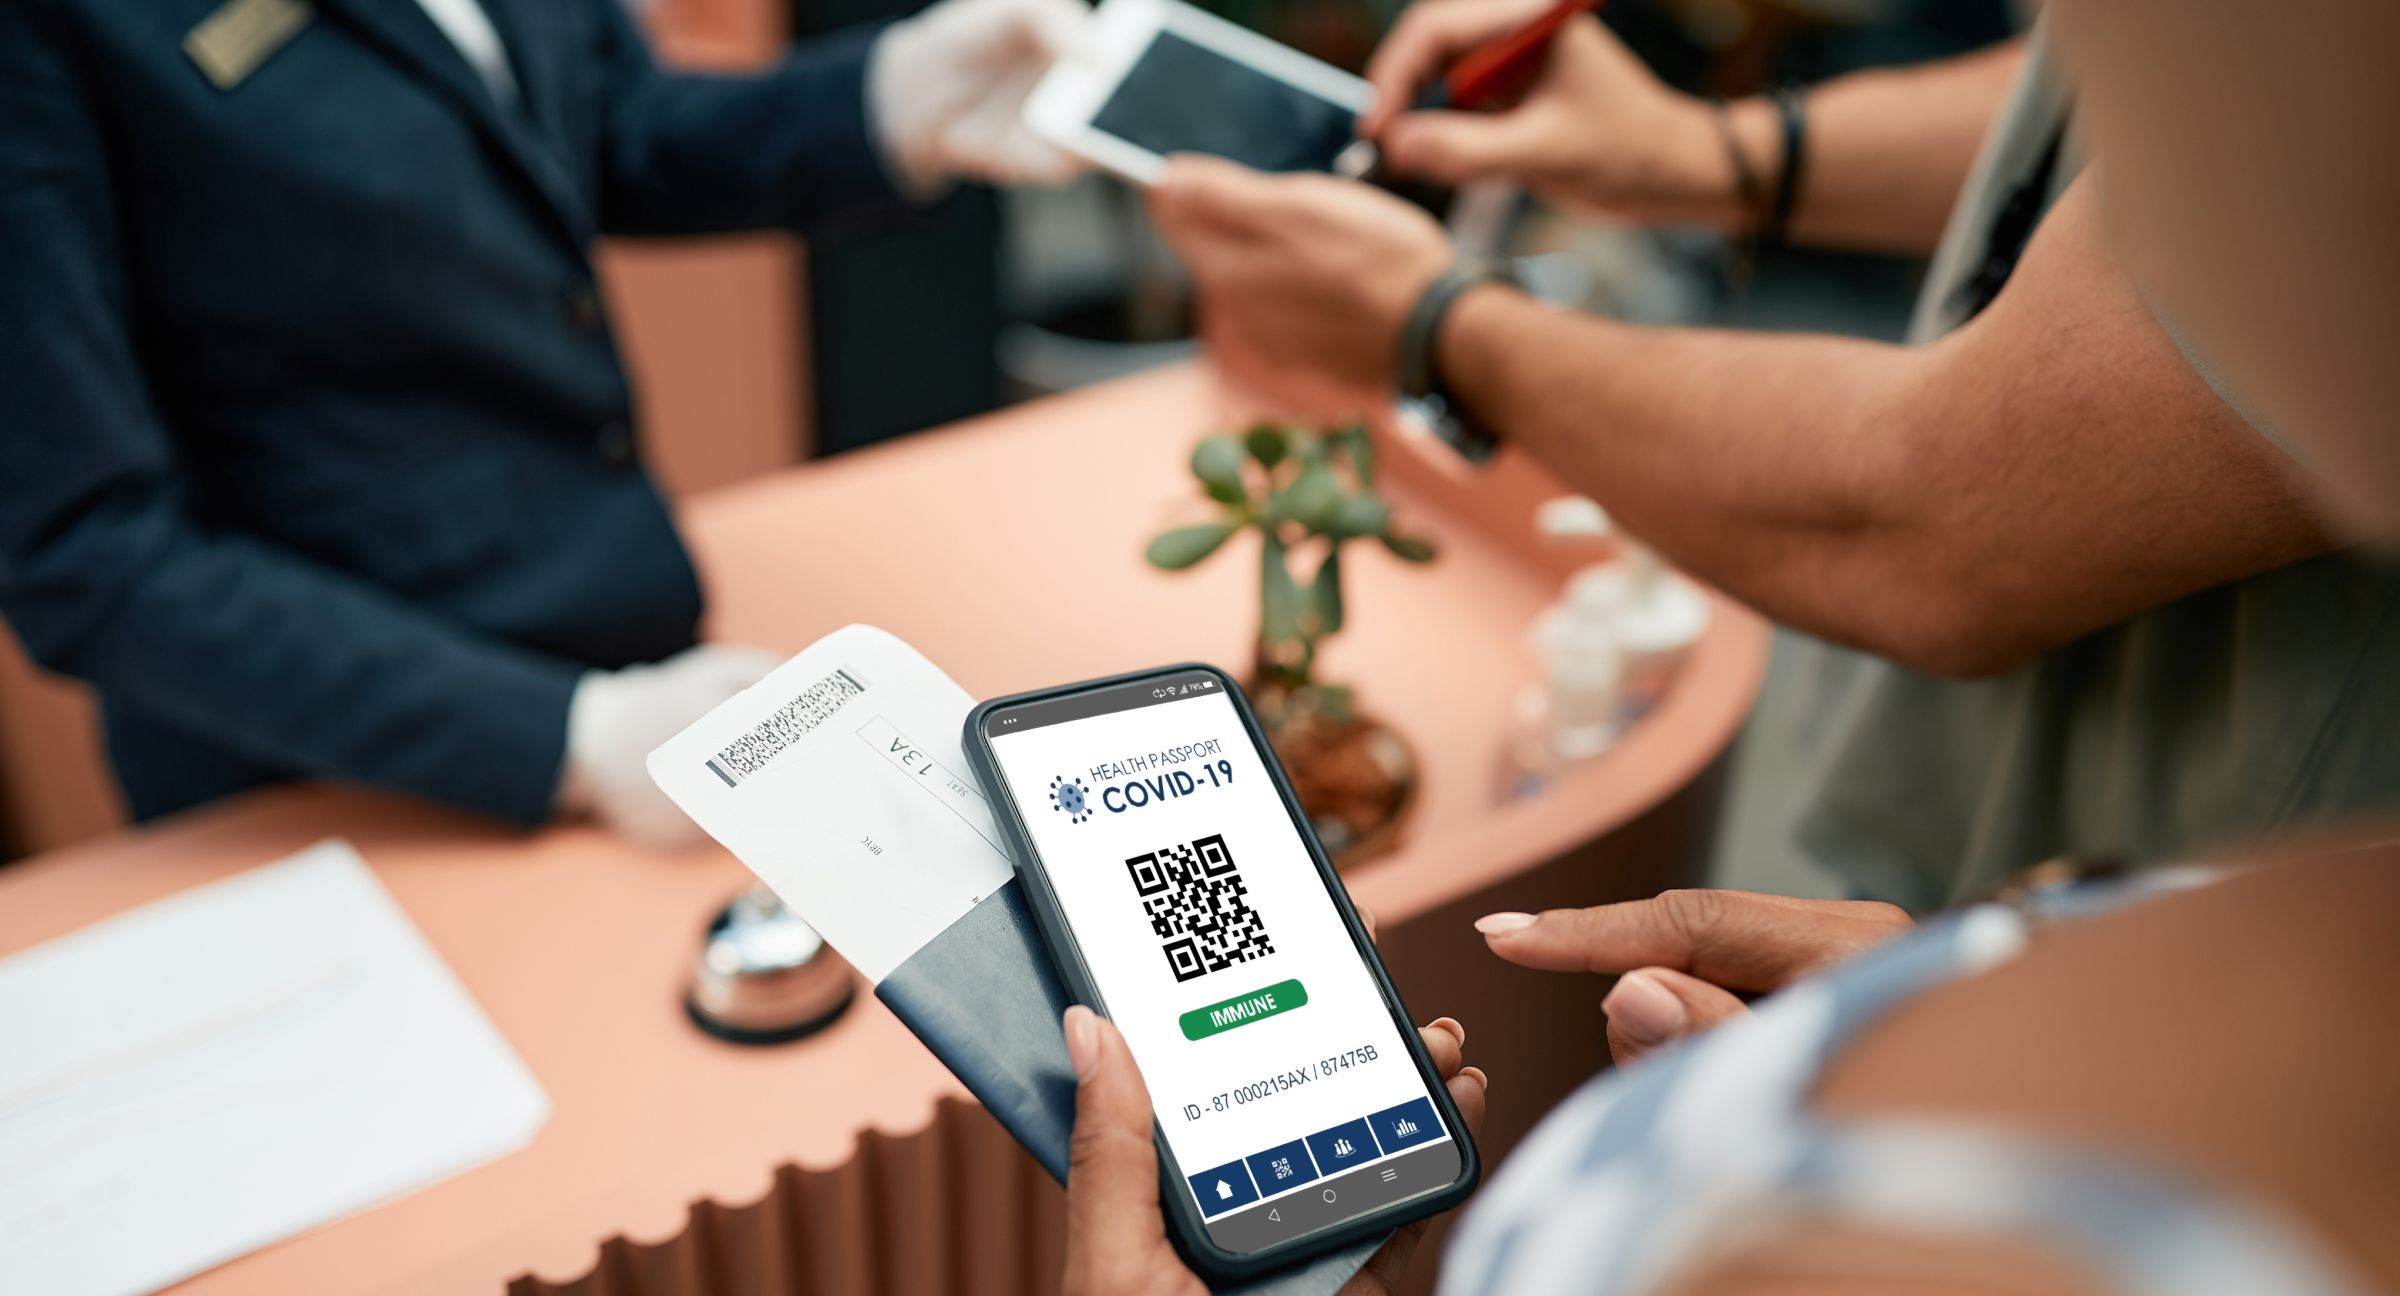 QR Codes can provide many benefits to your hotel business strategy. Read on to learn more about how QR Codes can streamline many of your business practices.